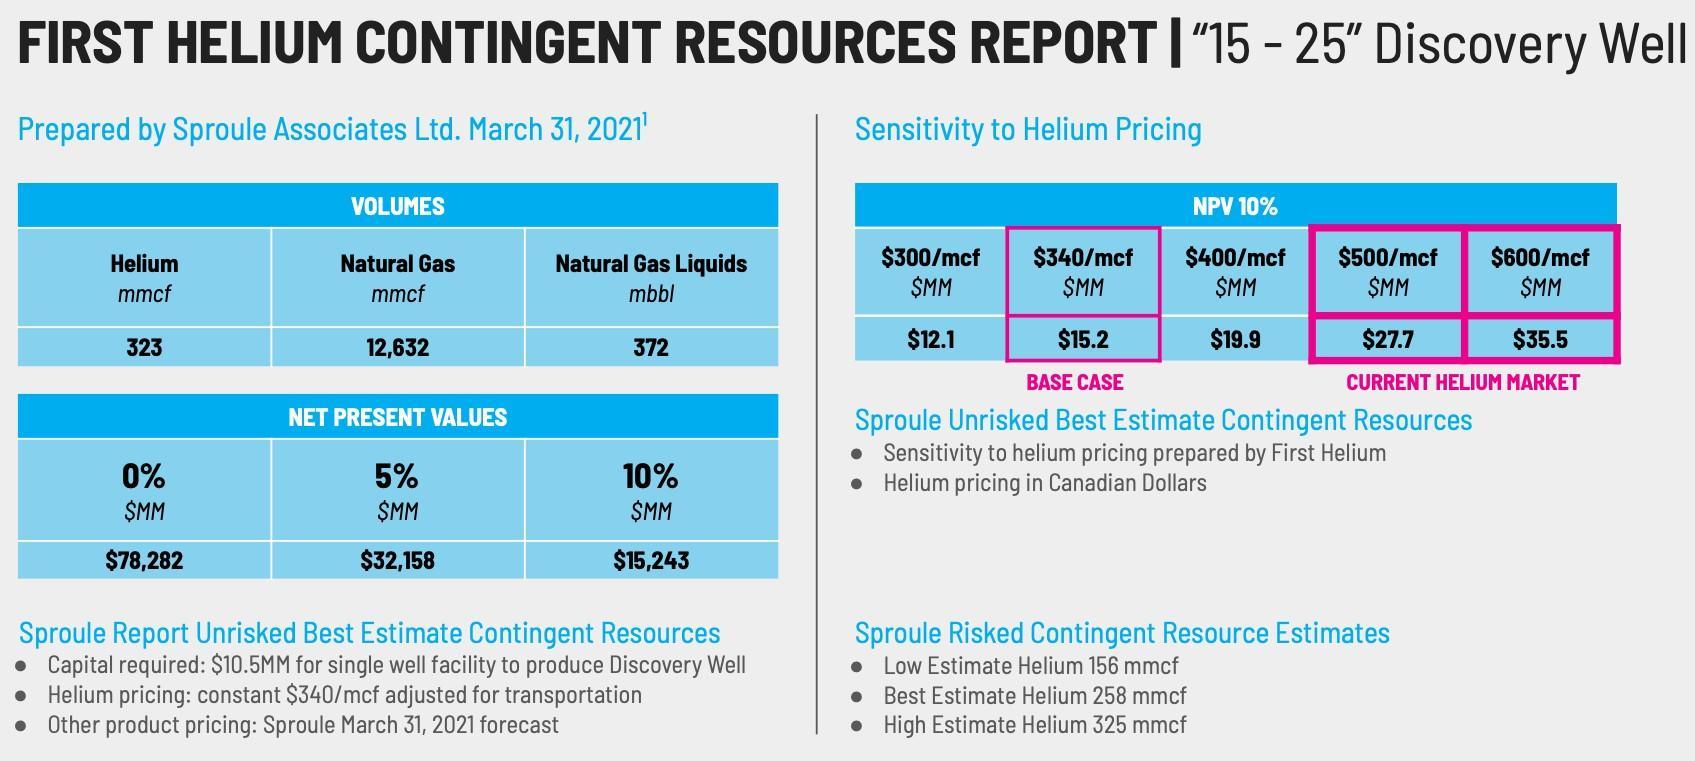 image8 Emerging Exploration Company Harnesses High-Yield Helium Assets to Drive Robust Growth and Market Share